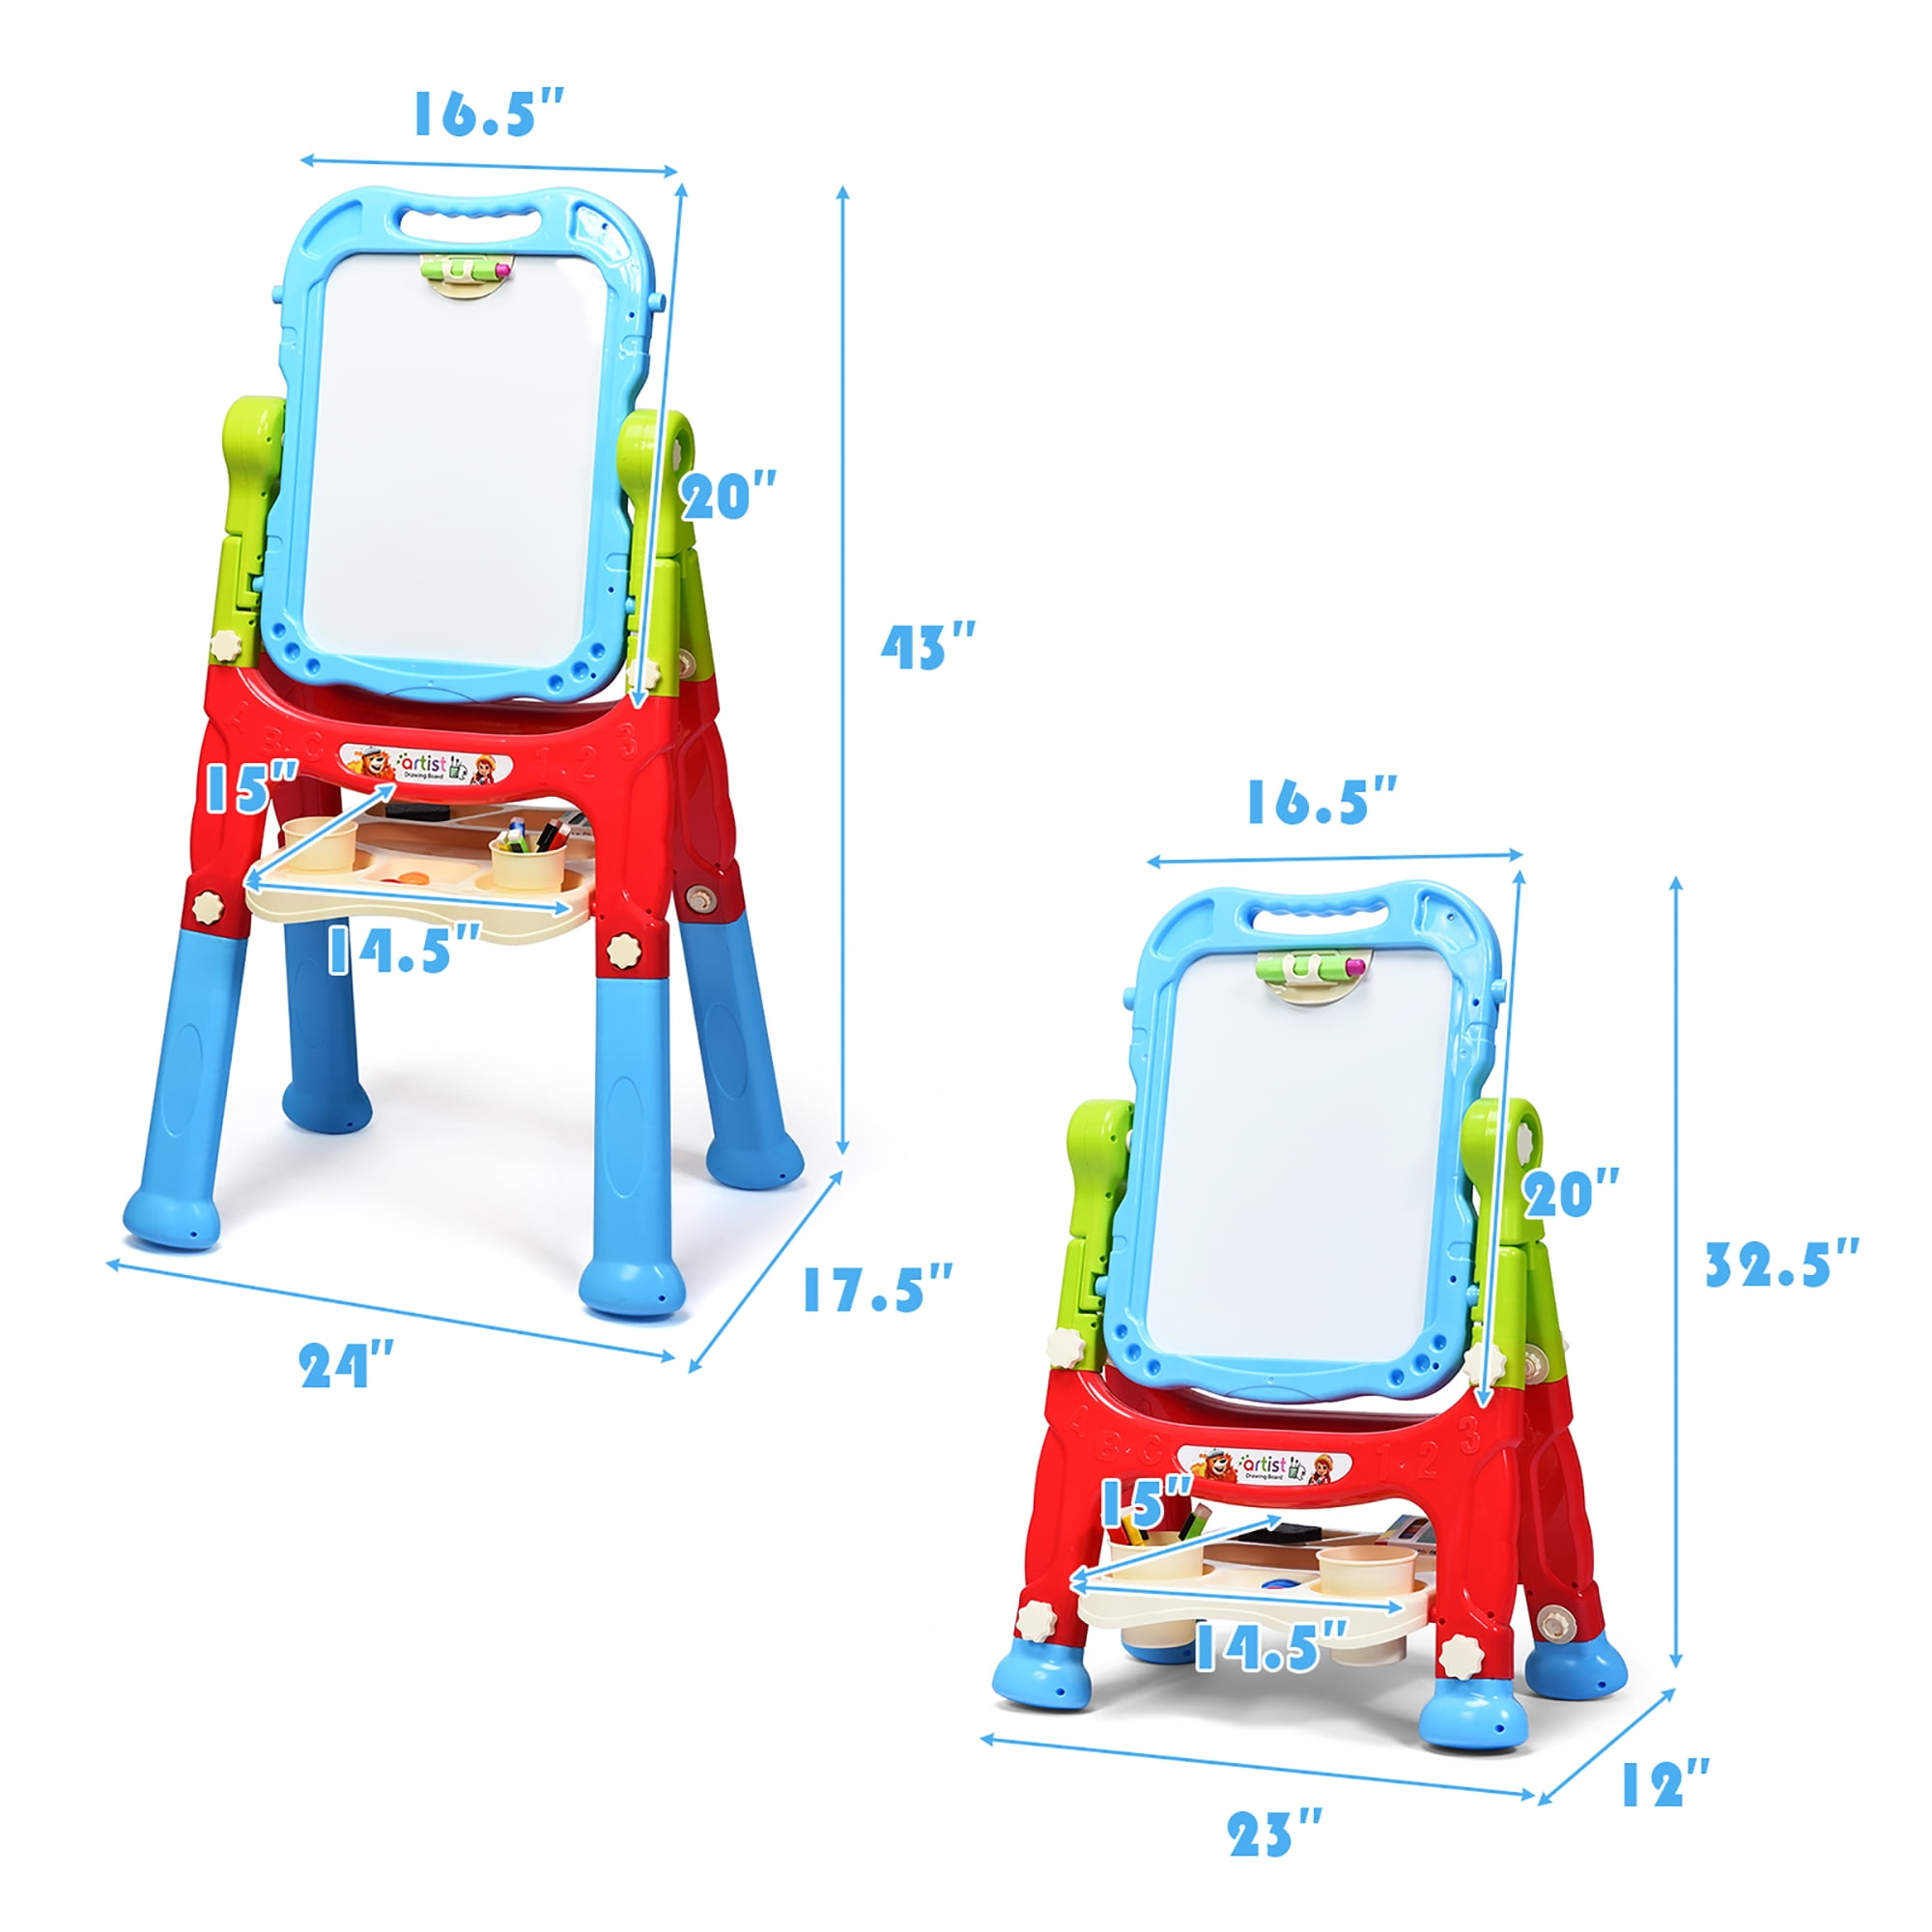 Toy Gate ツ on Instagram: MEEDEN®️- WOODEN DOUBLE SIDED MAGNETIC BOARD  High-quality, natural pinewood is used to construct the standing easel.  Sturdy construction features more security and stability. Using throughout  whole childhood